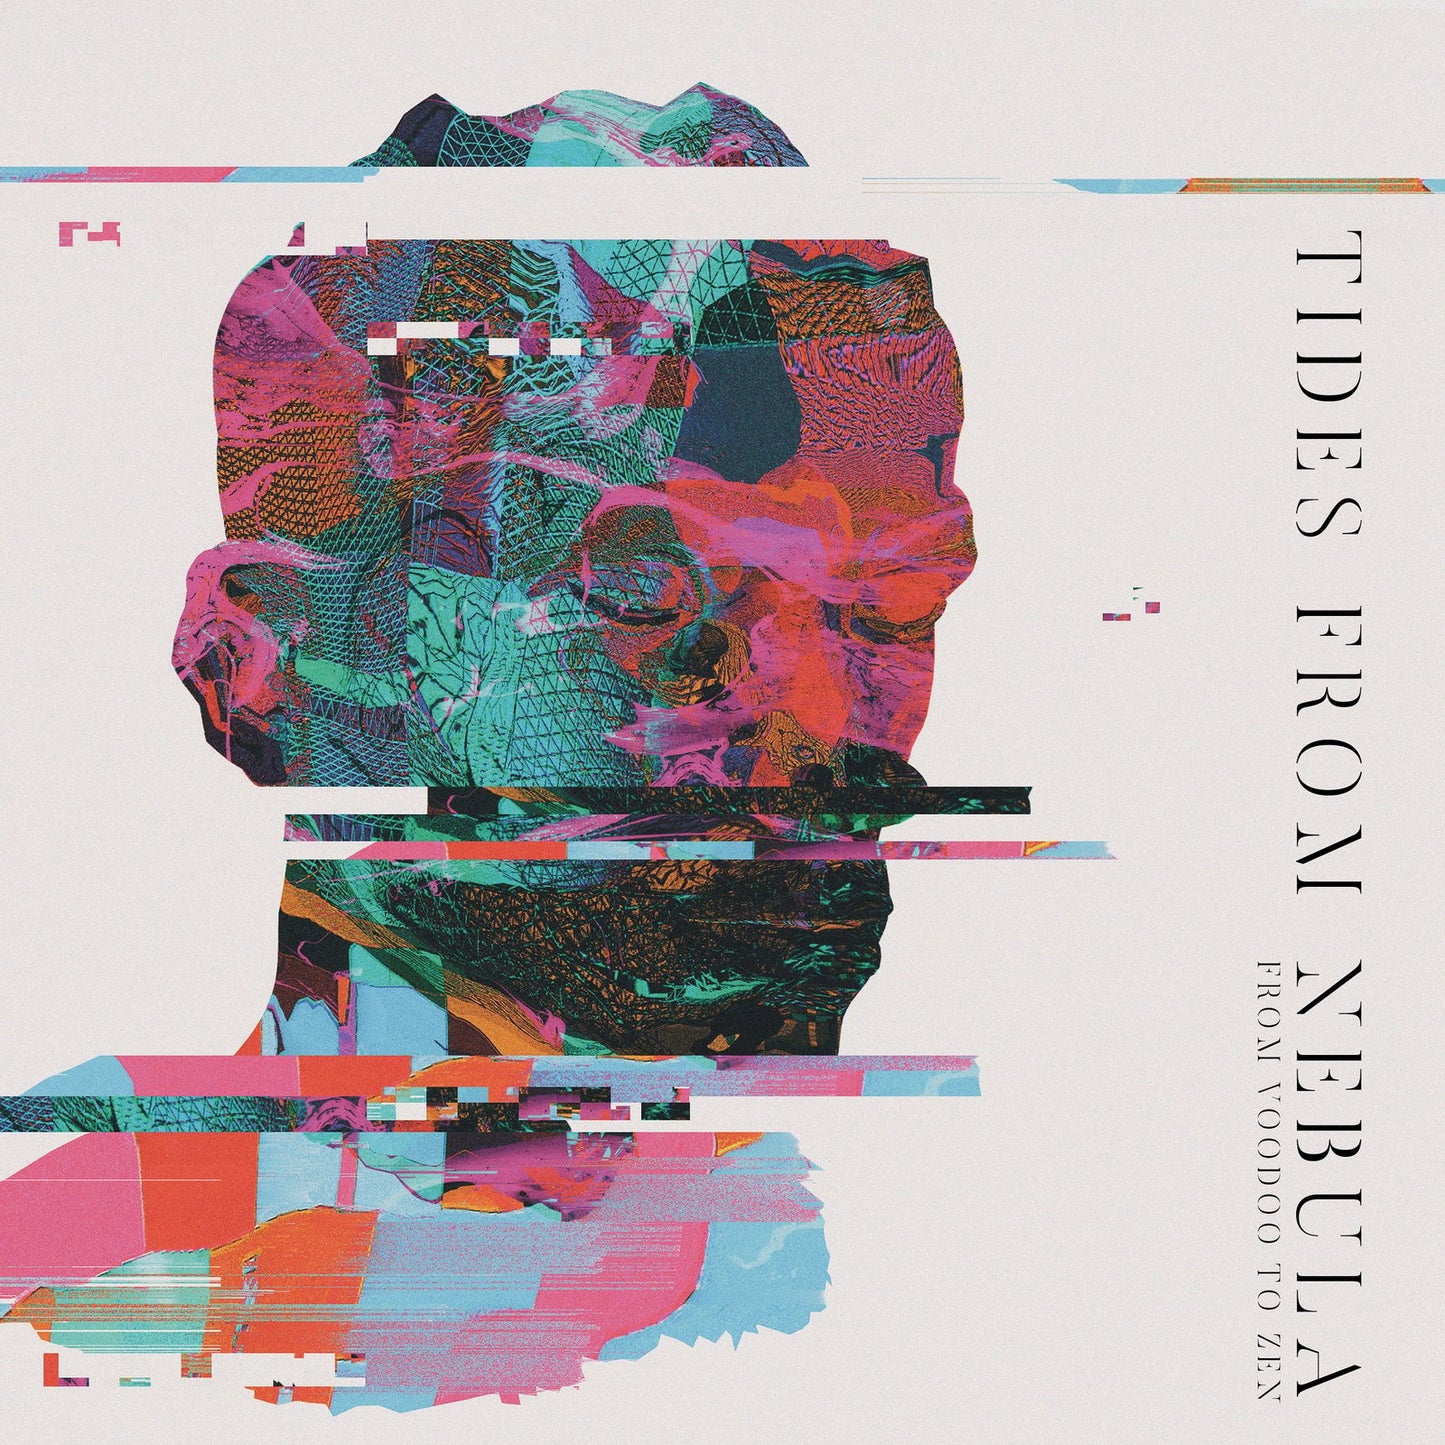 Tides From Nebula "From Voodoo To Zen" CD